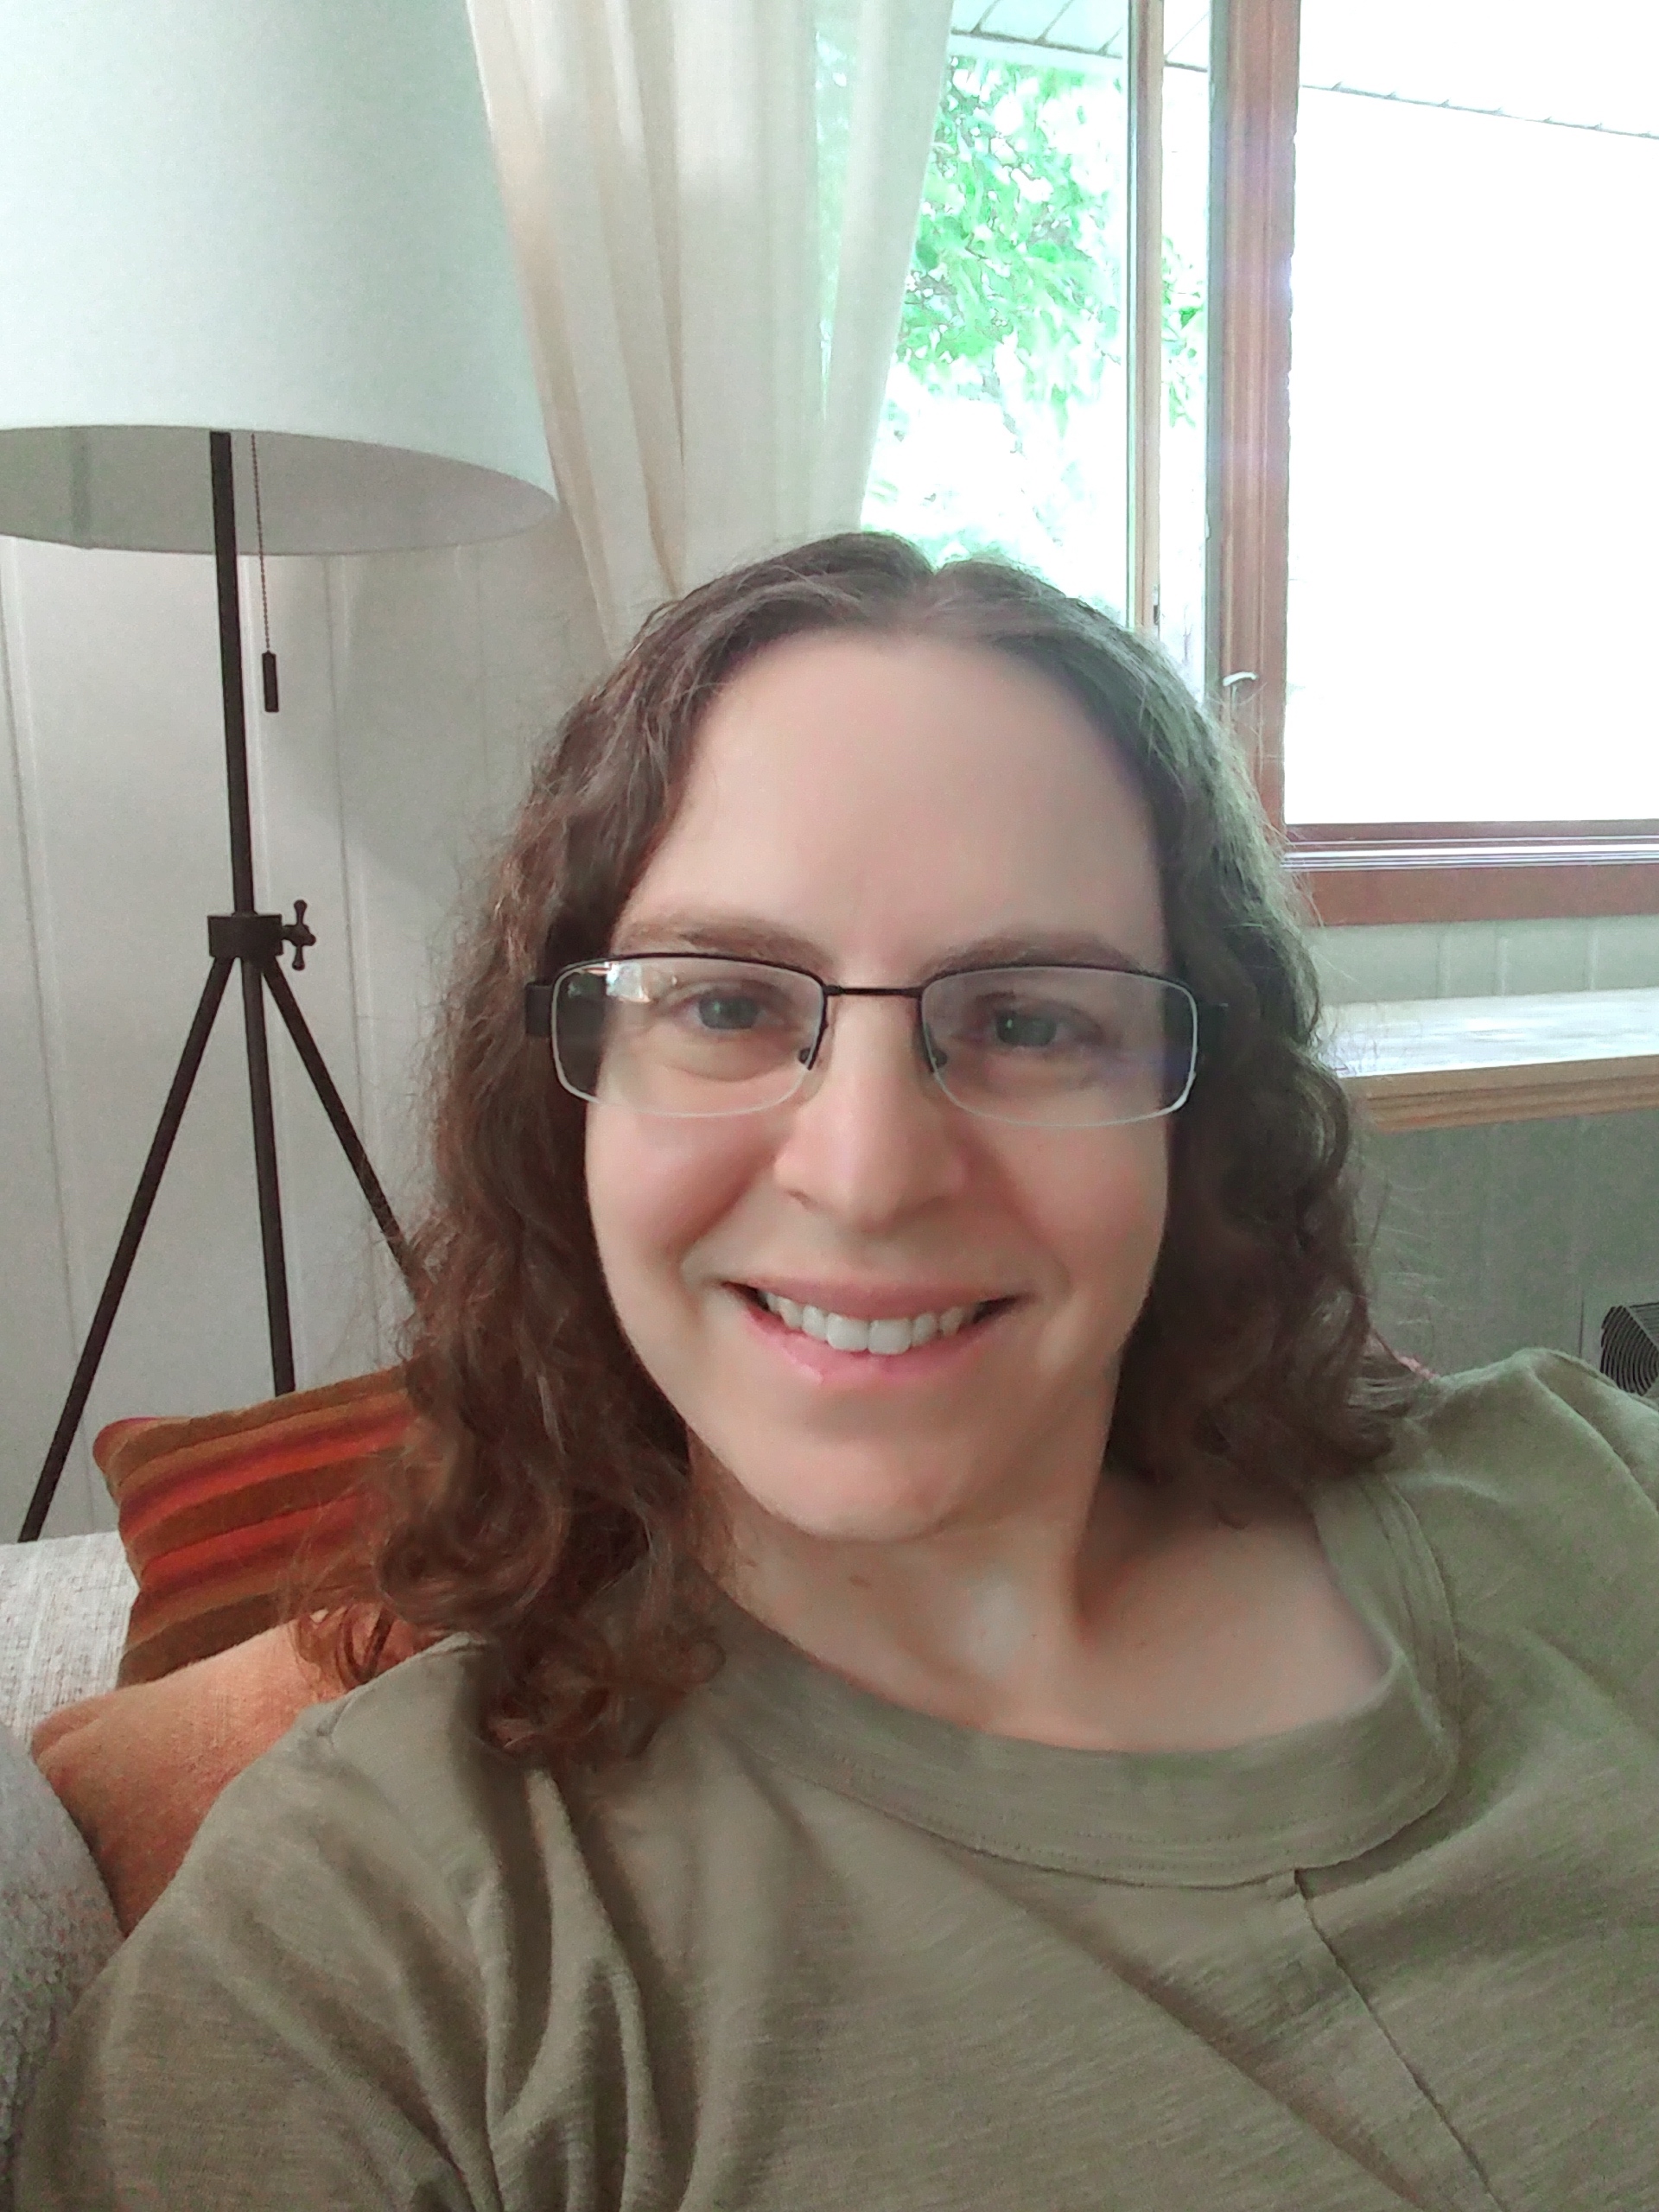 Alana is seated on a couch covered in pillows in front of an open window with light coming through. She wears rectangular glasses, an olive green t-shirt and her brown curly hair reaches her shoulders.